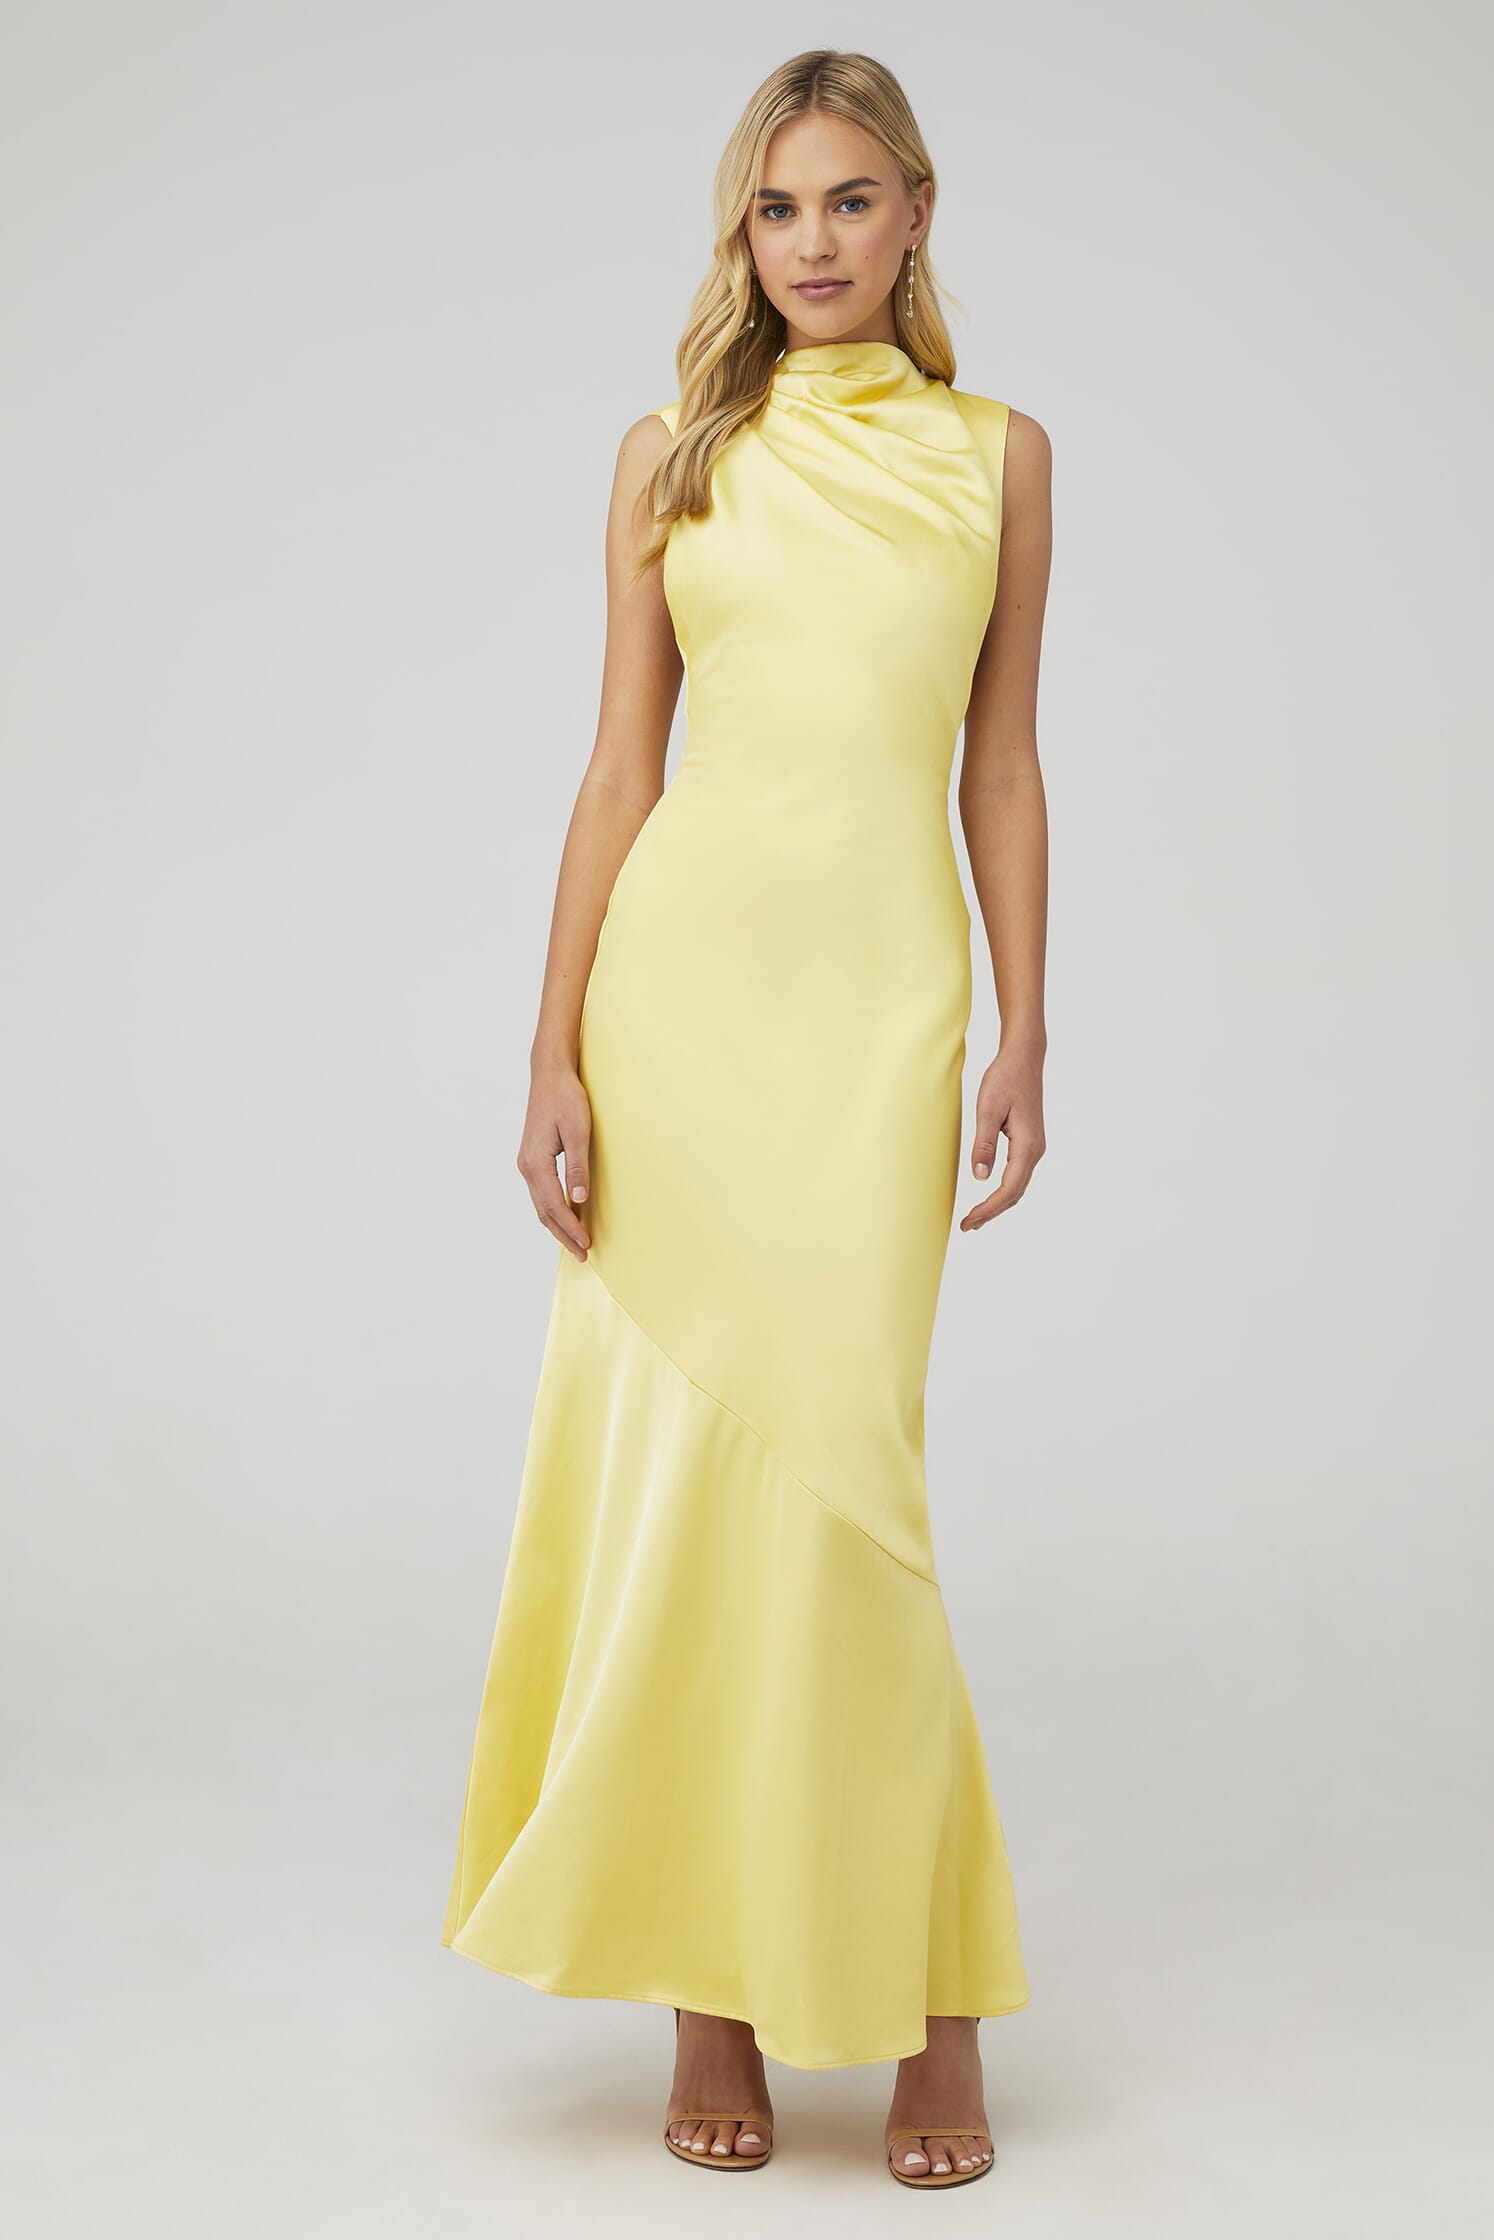 SIGNIFICANT OTHER Lana Maxi Dress in Lemon